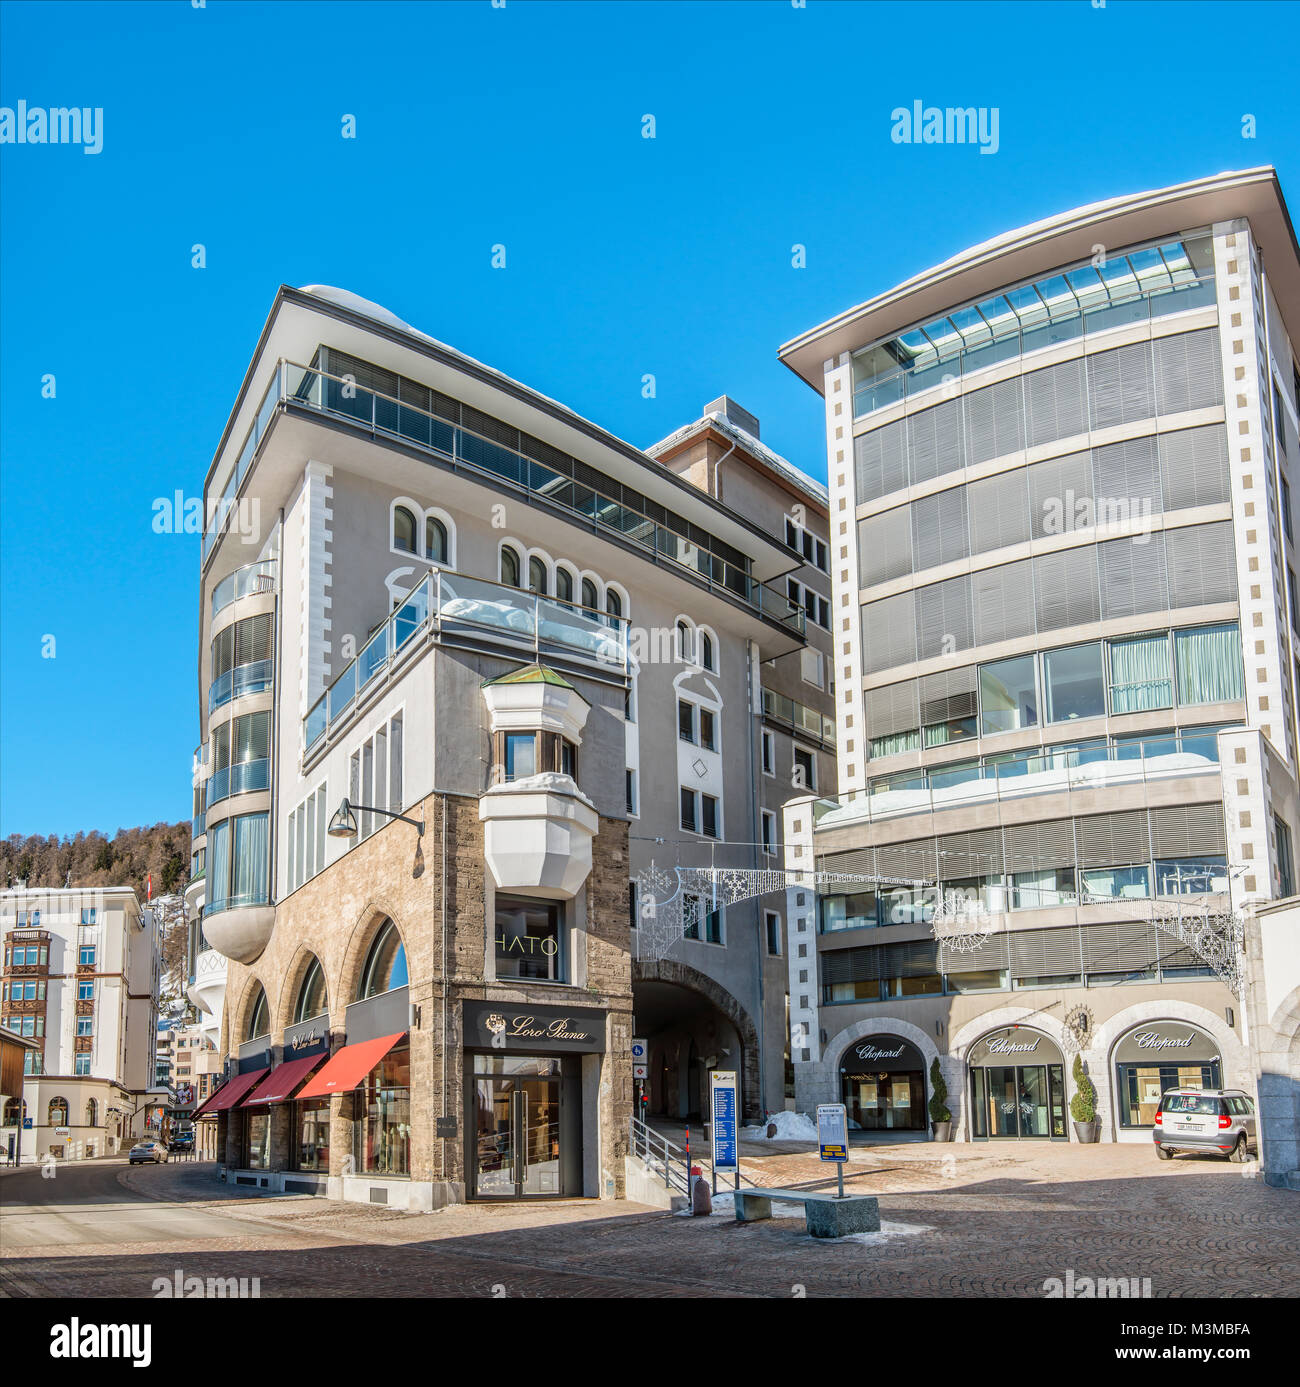 Architecture at the town center of St.Moritz, Grisons, Switzerland Stock Photo